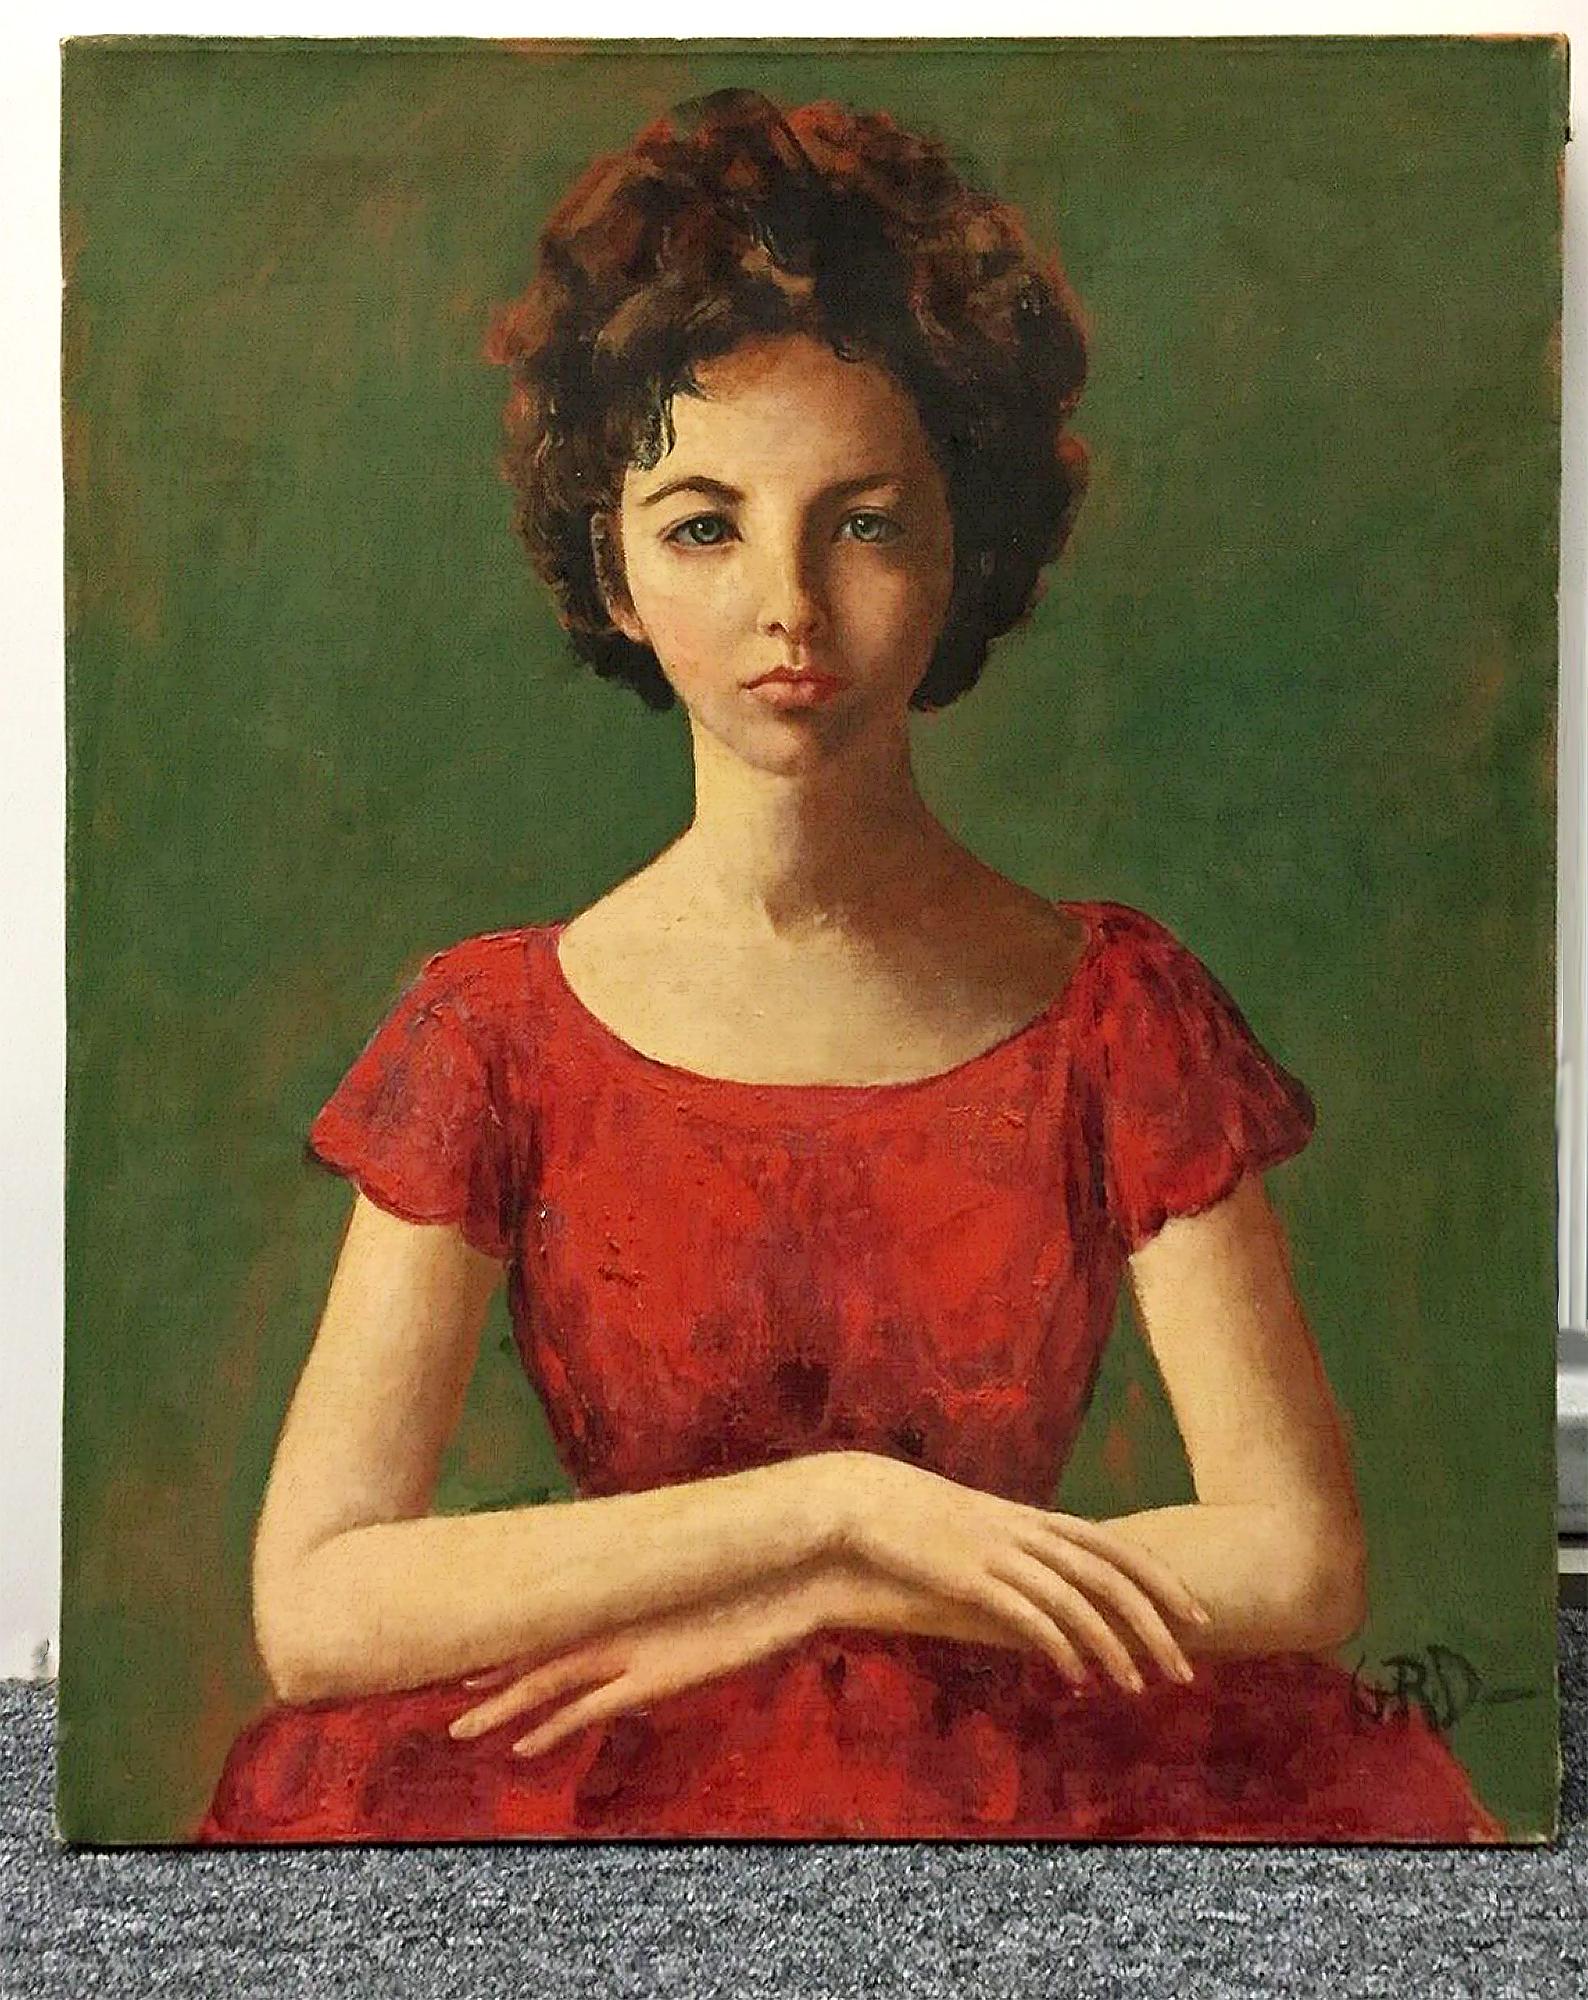 Woman in a Red Dress, Mid Century Female Illustrator/ Artist, Elizabeth Taylor ? - American Realist Painting by Gladys Rockmore Davis